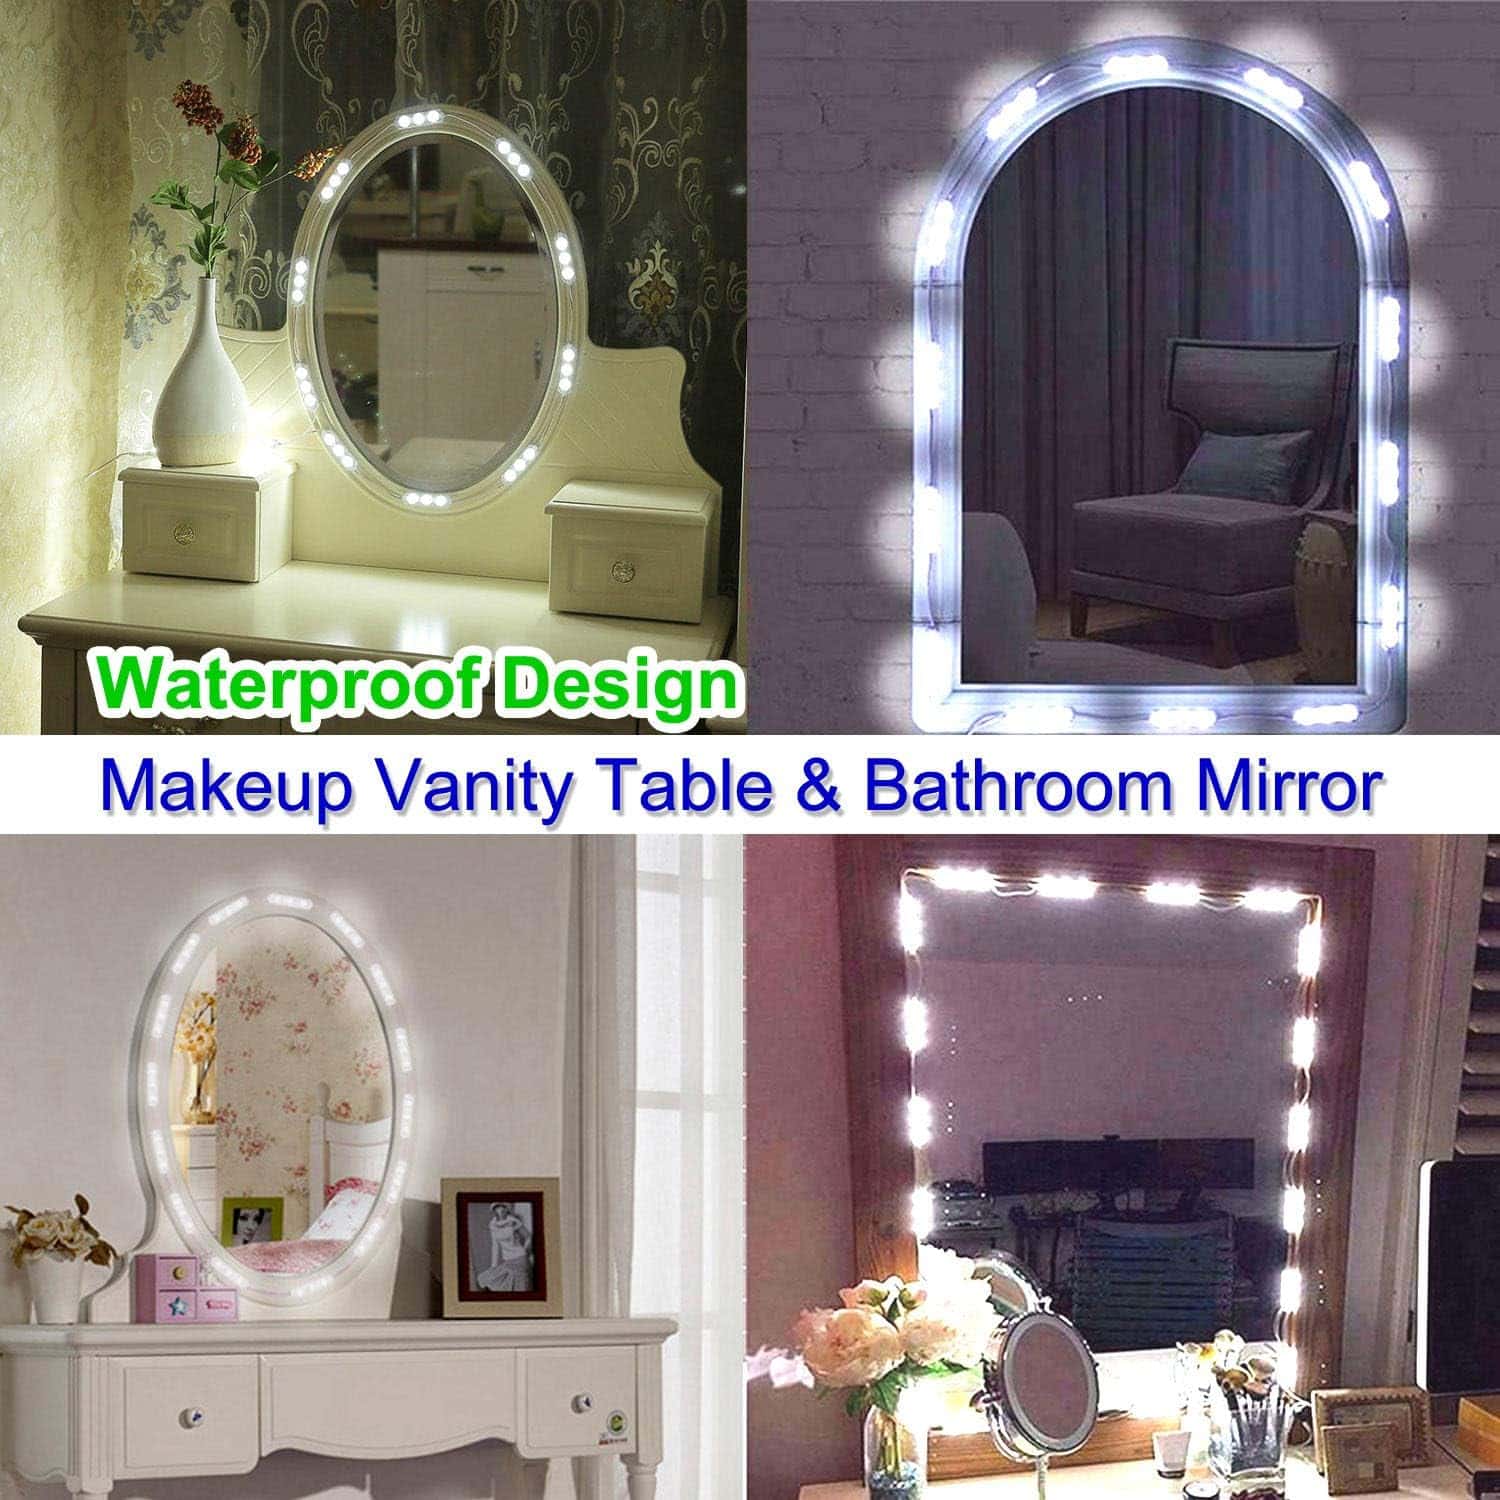 selfila Led Vanity Mirror Lights Kit, 5 Color Hollywood Style Vanity Make Up Light, 11ft with Dimmable Color and Brightness Lighting Fixture Strip for Table  Bathroom Mirror, Mirror Not Included